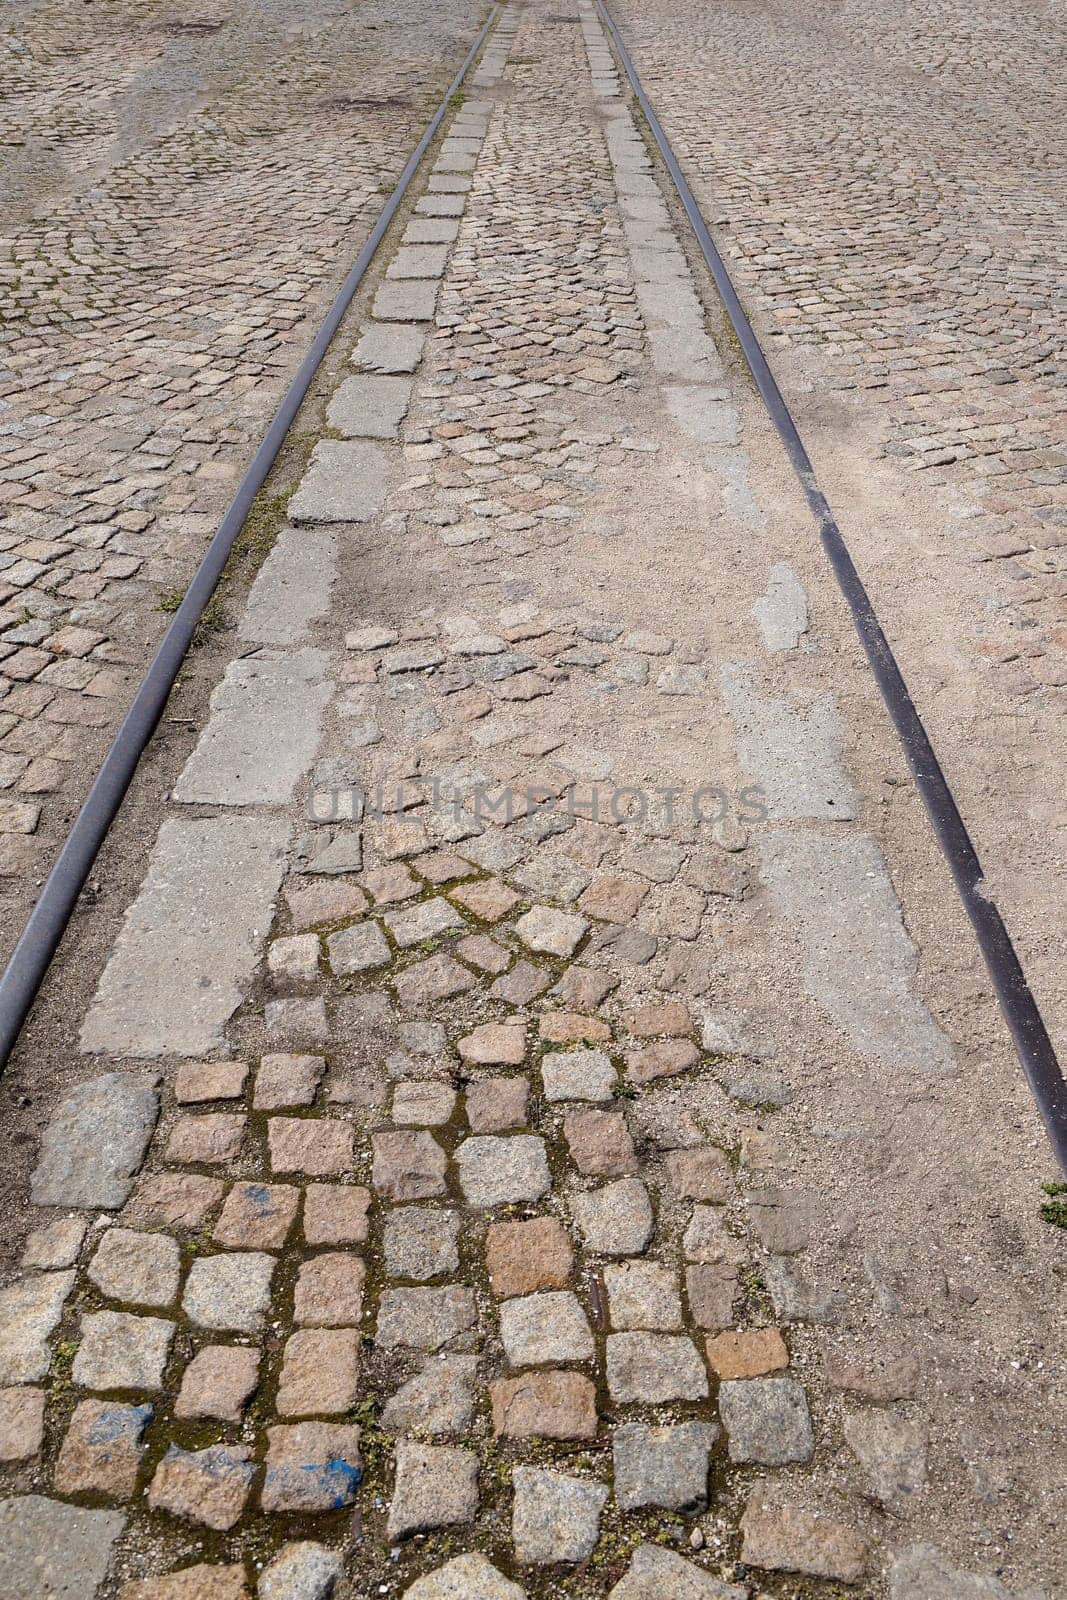 old rails in pavement stone paving for vertical vintage background.